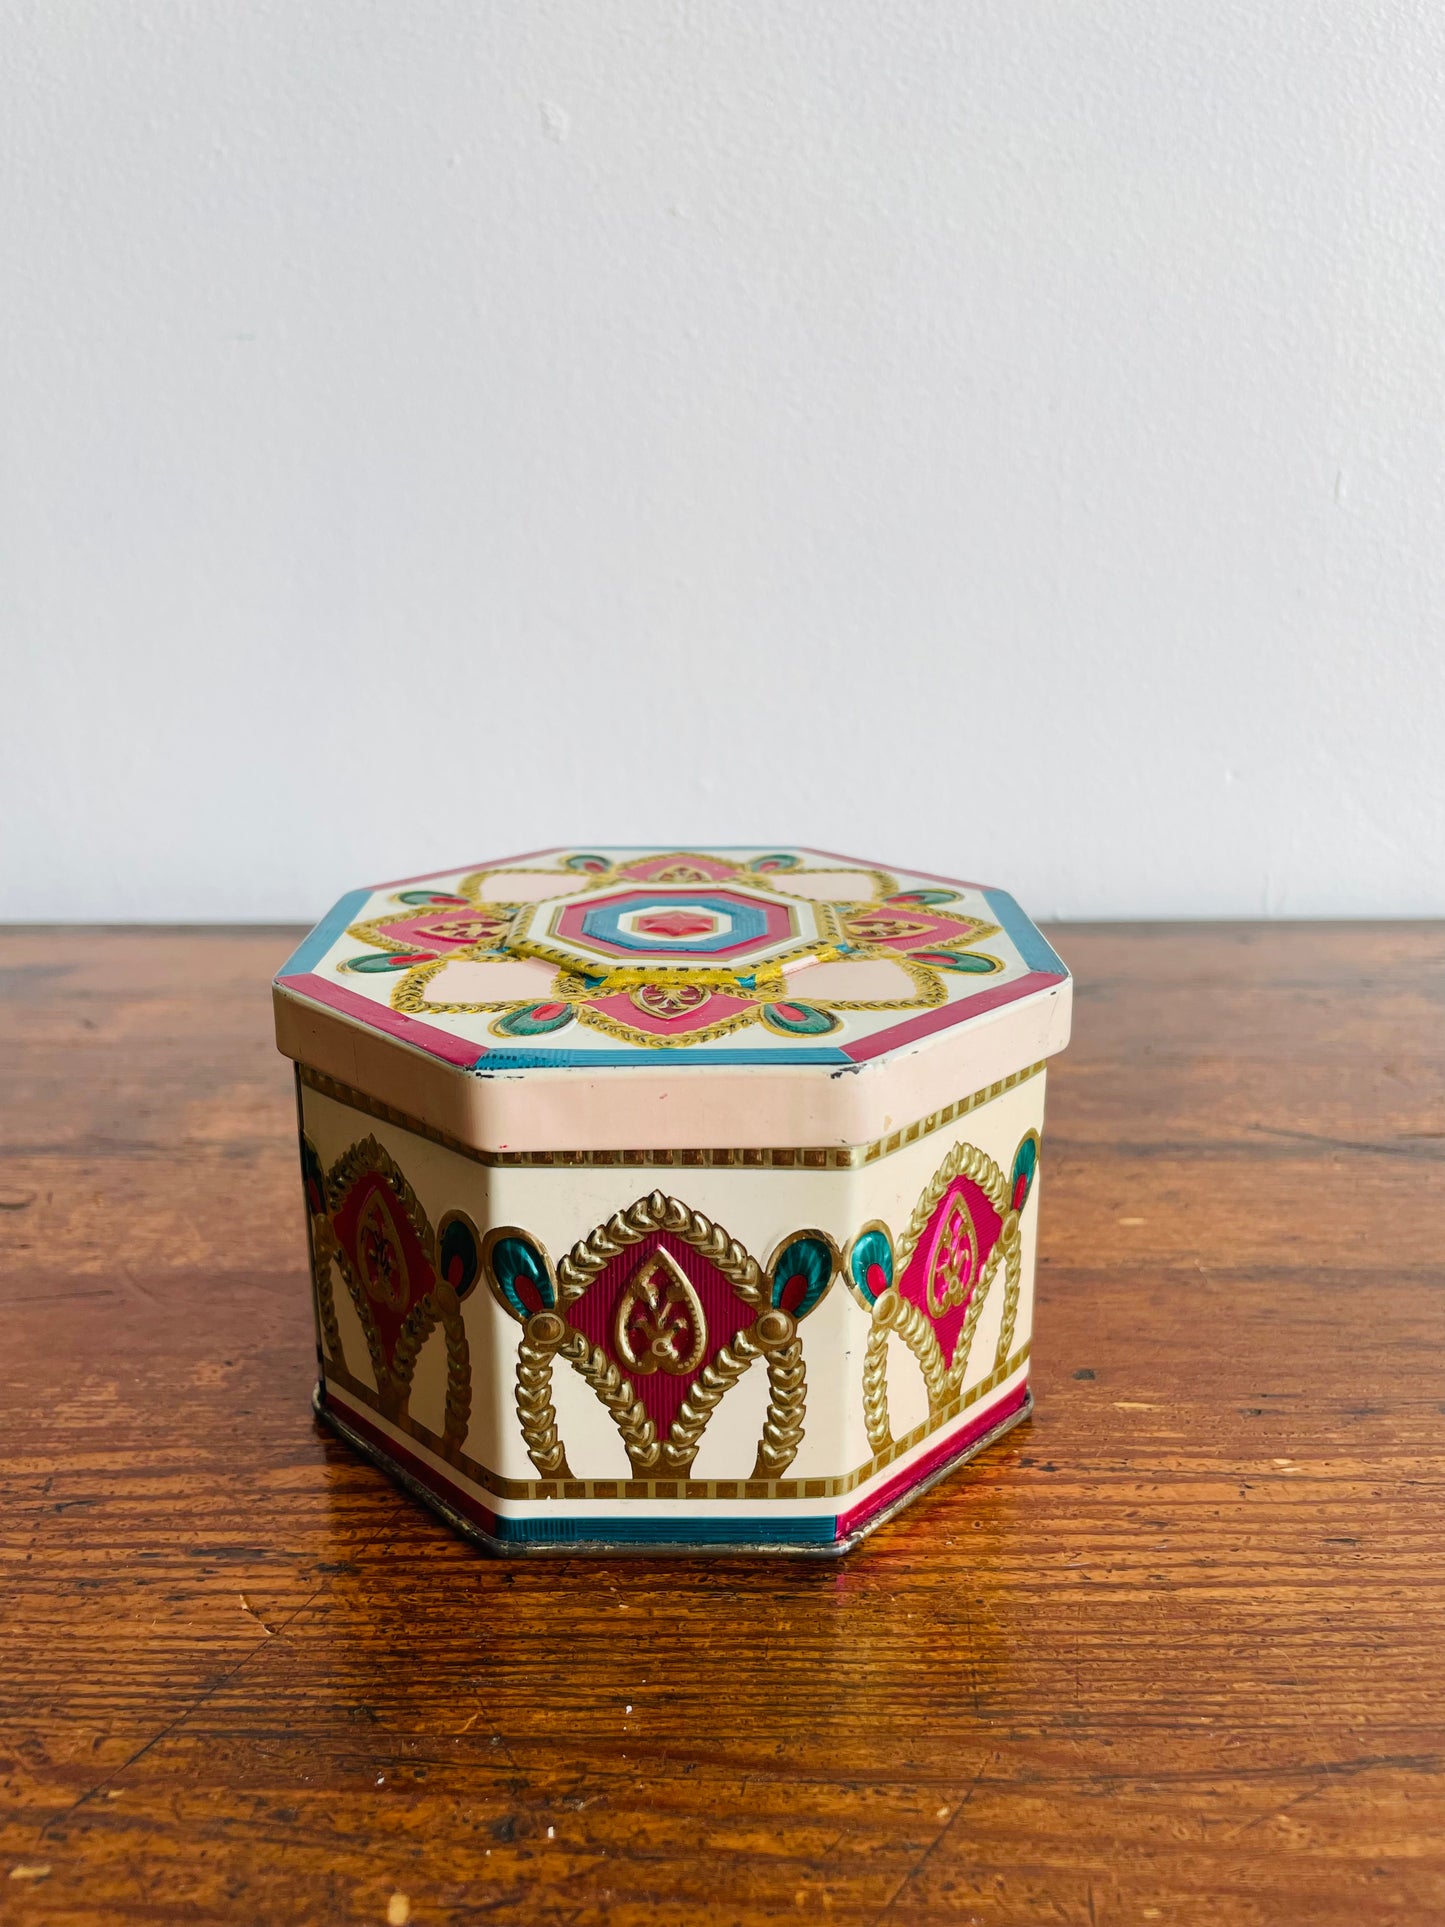 Mystery Button Box - Bright & Fun Tin Container Full of Vintage Buttons